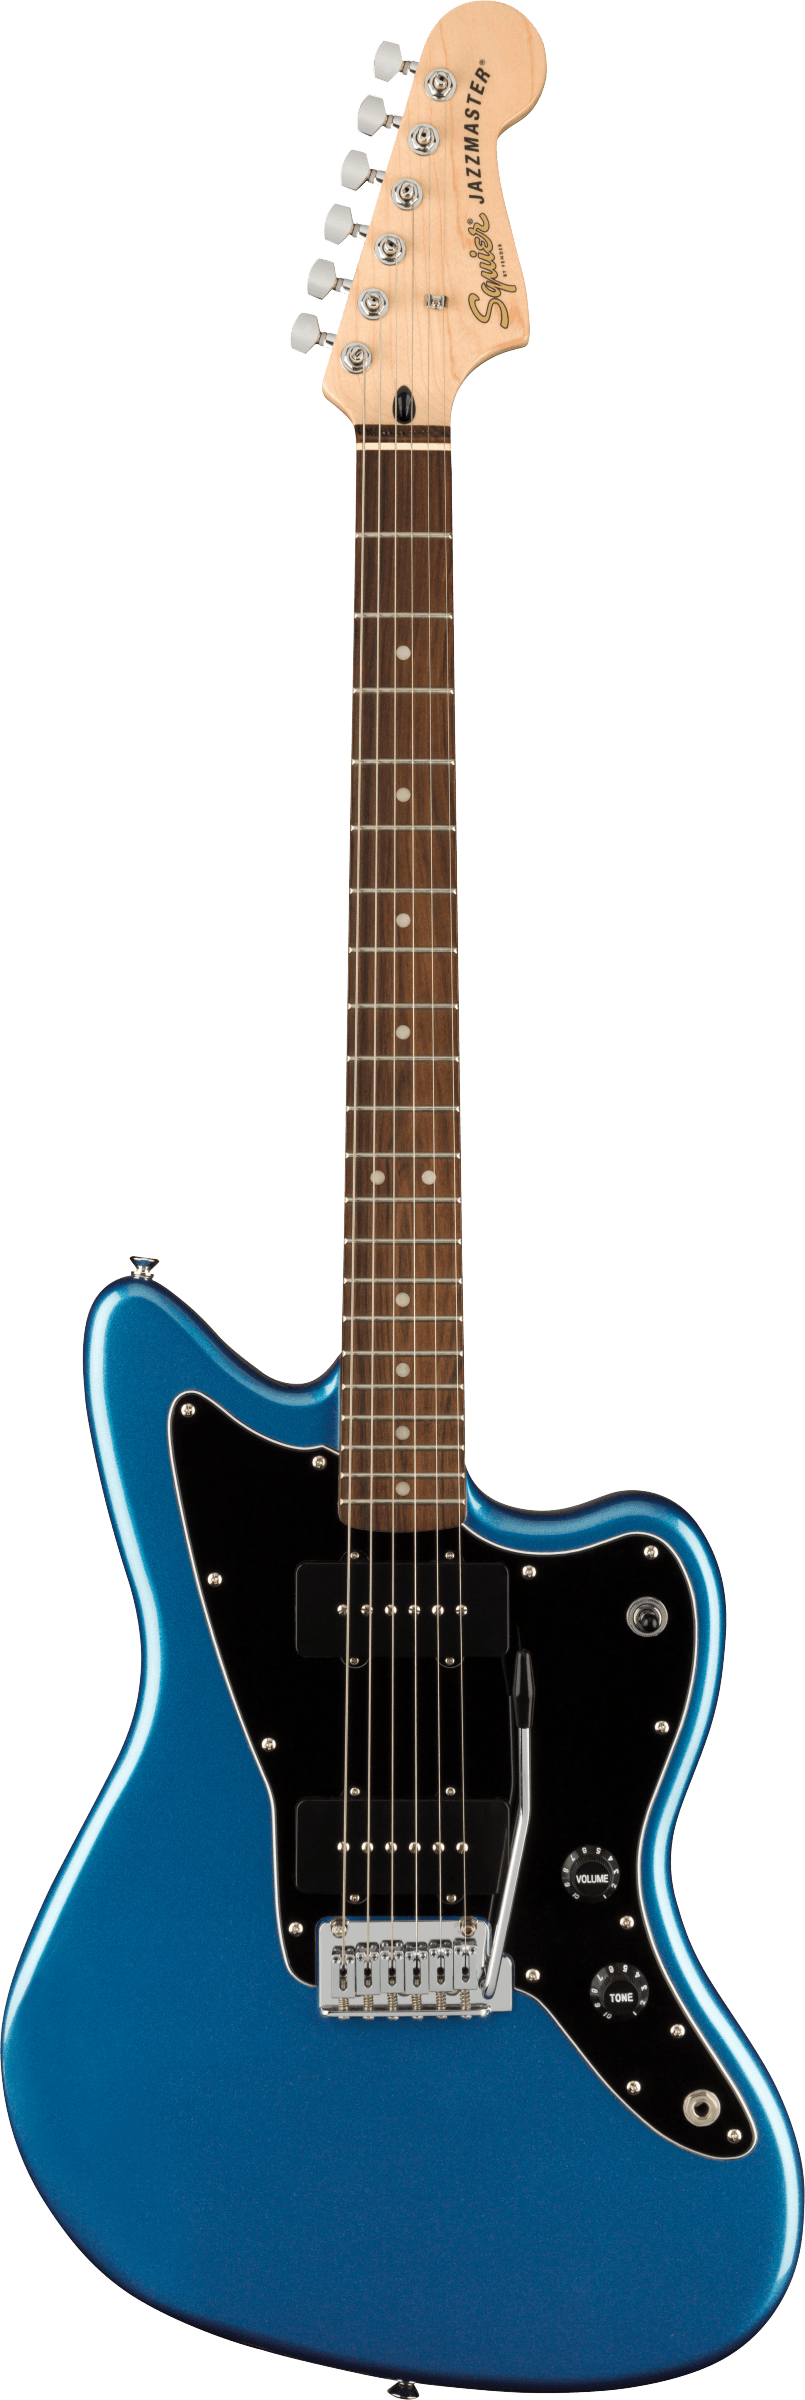 SQUIER AFFINITY JAZZMASTER ELECTRIC GUITAR - LAKE PLACID BLUE - Joondalup Music Centre